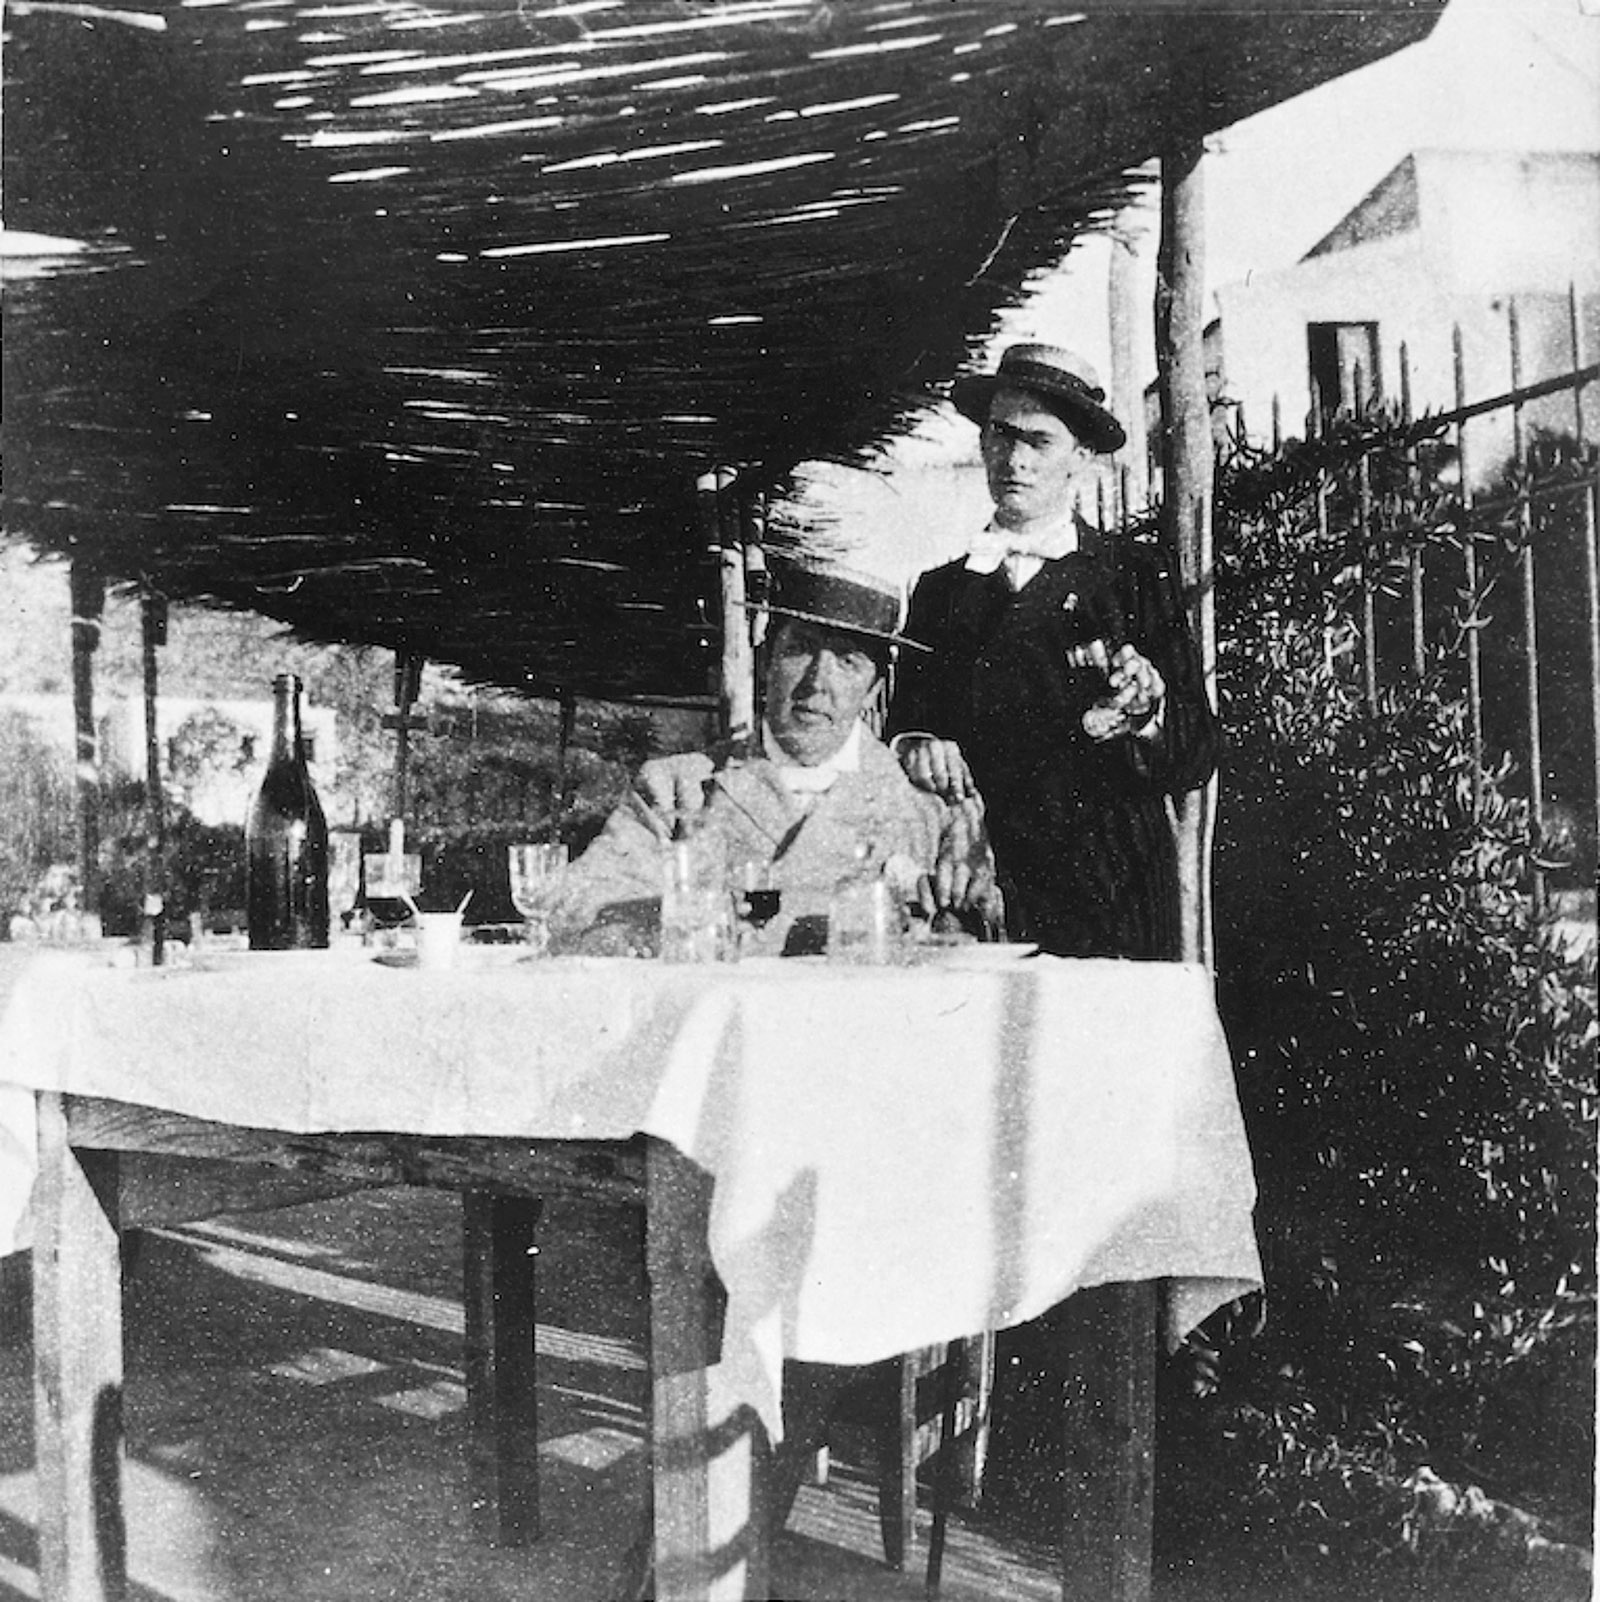 Oscar Wilde having lunch with Lord Alfred Douglas near Dieppe in 1898, after his release from Reading Gaol